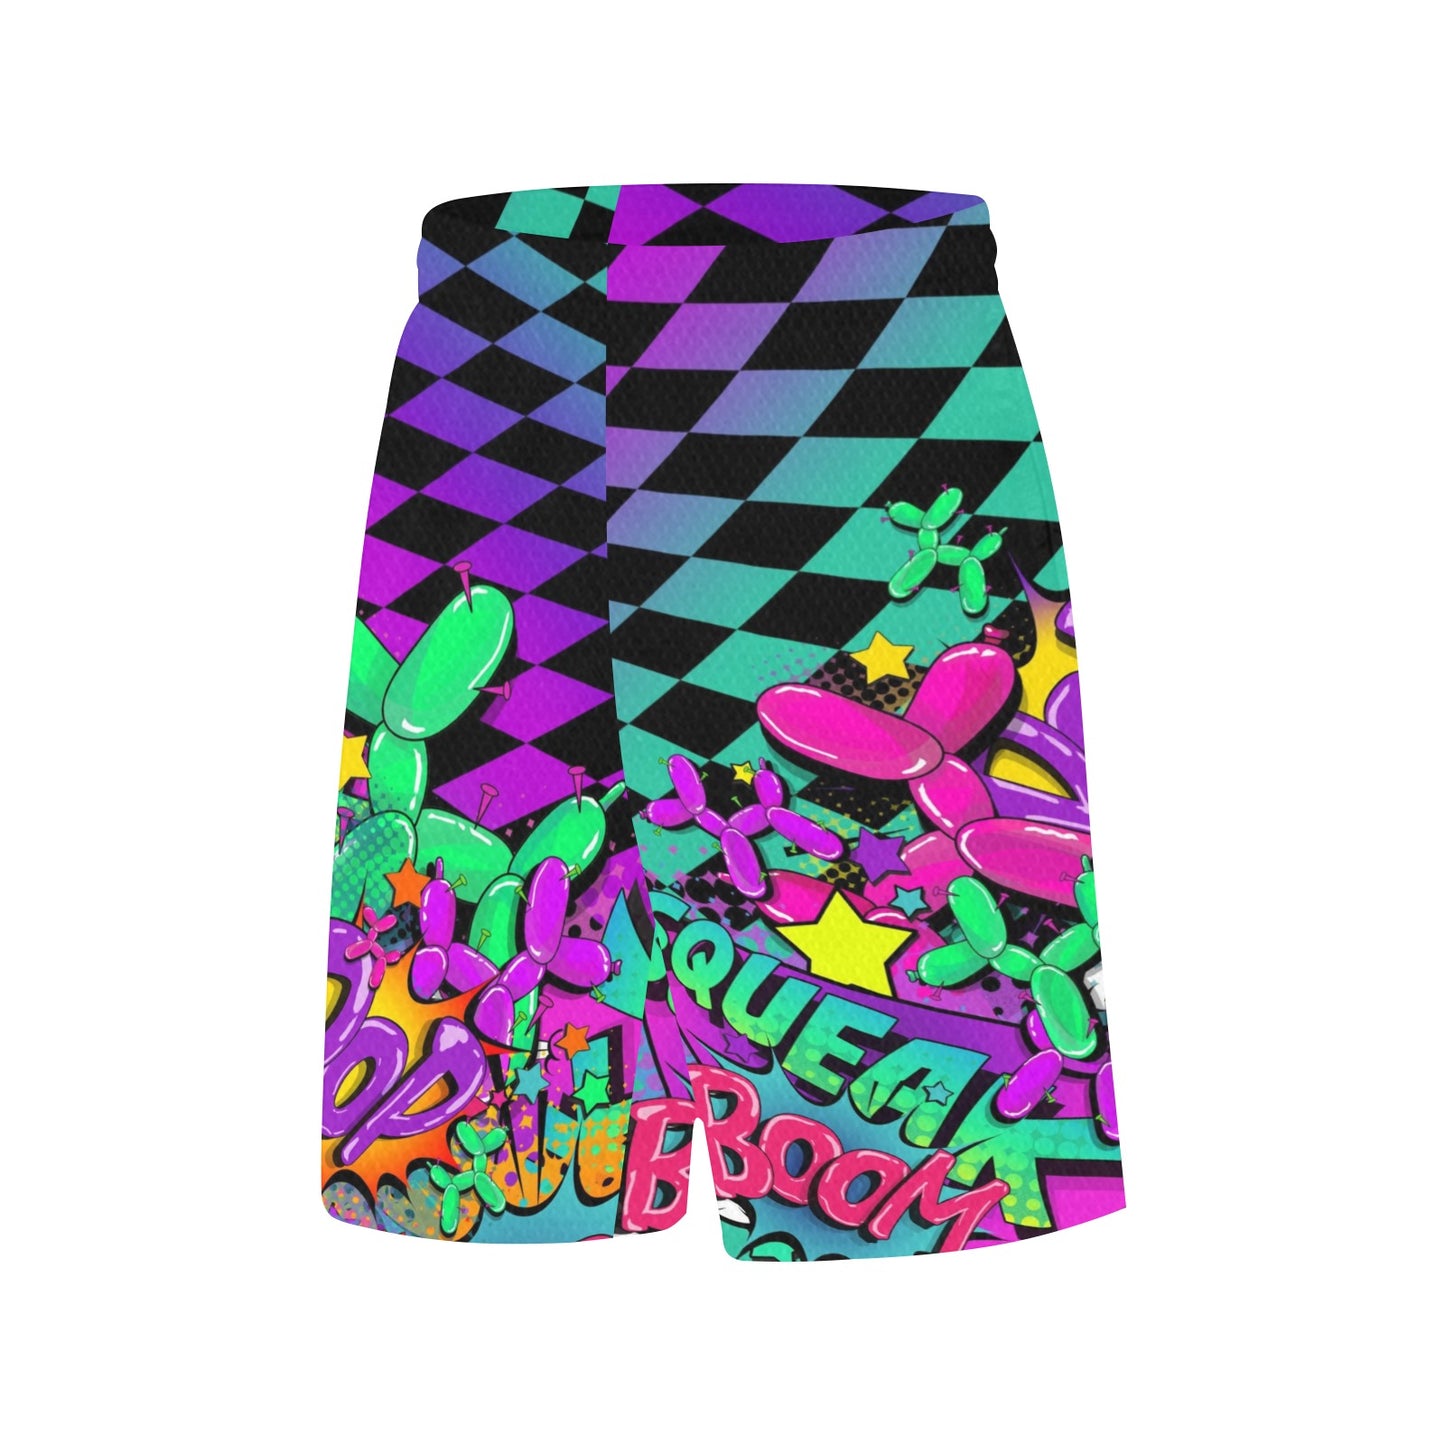 Fun shorts for balloon artists and entertainers. Basketball short material